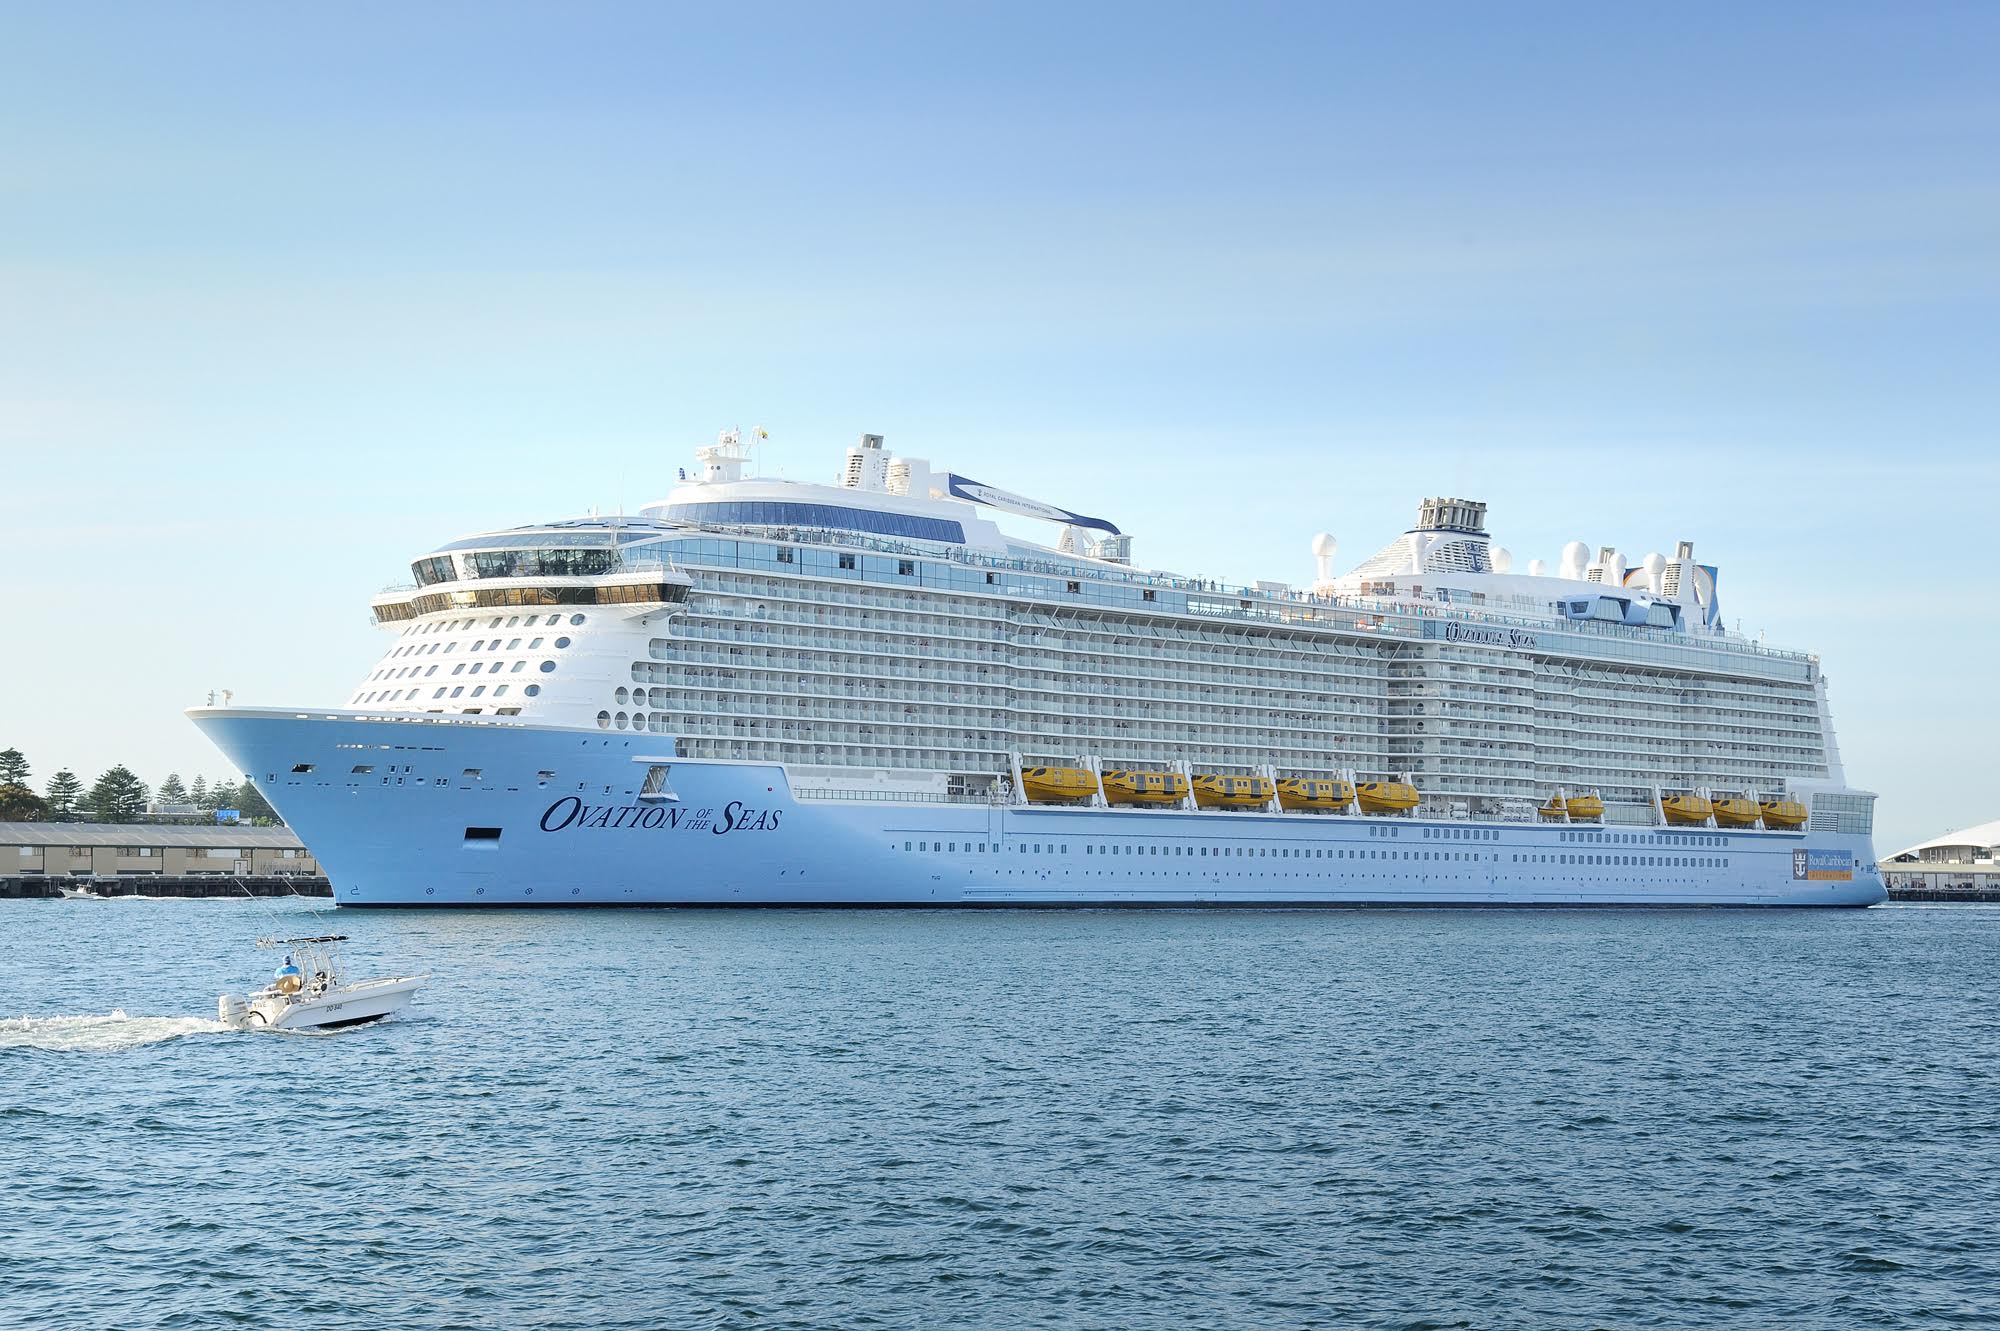 Ovation of the Seas arrives in Fremantle ahead of her season Down Under